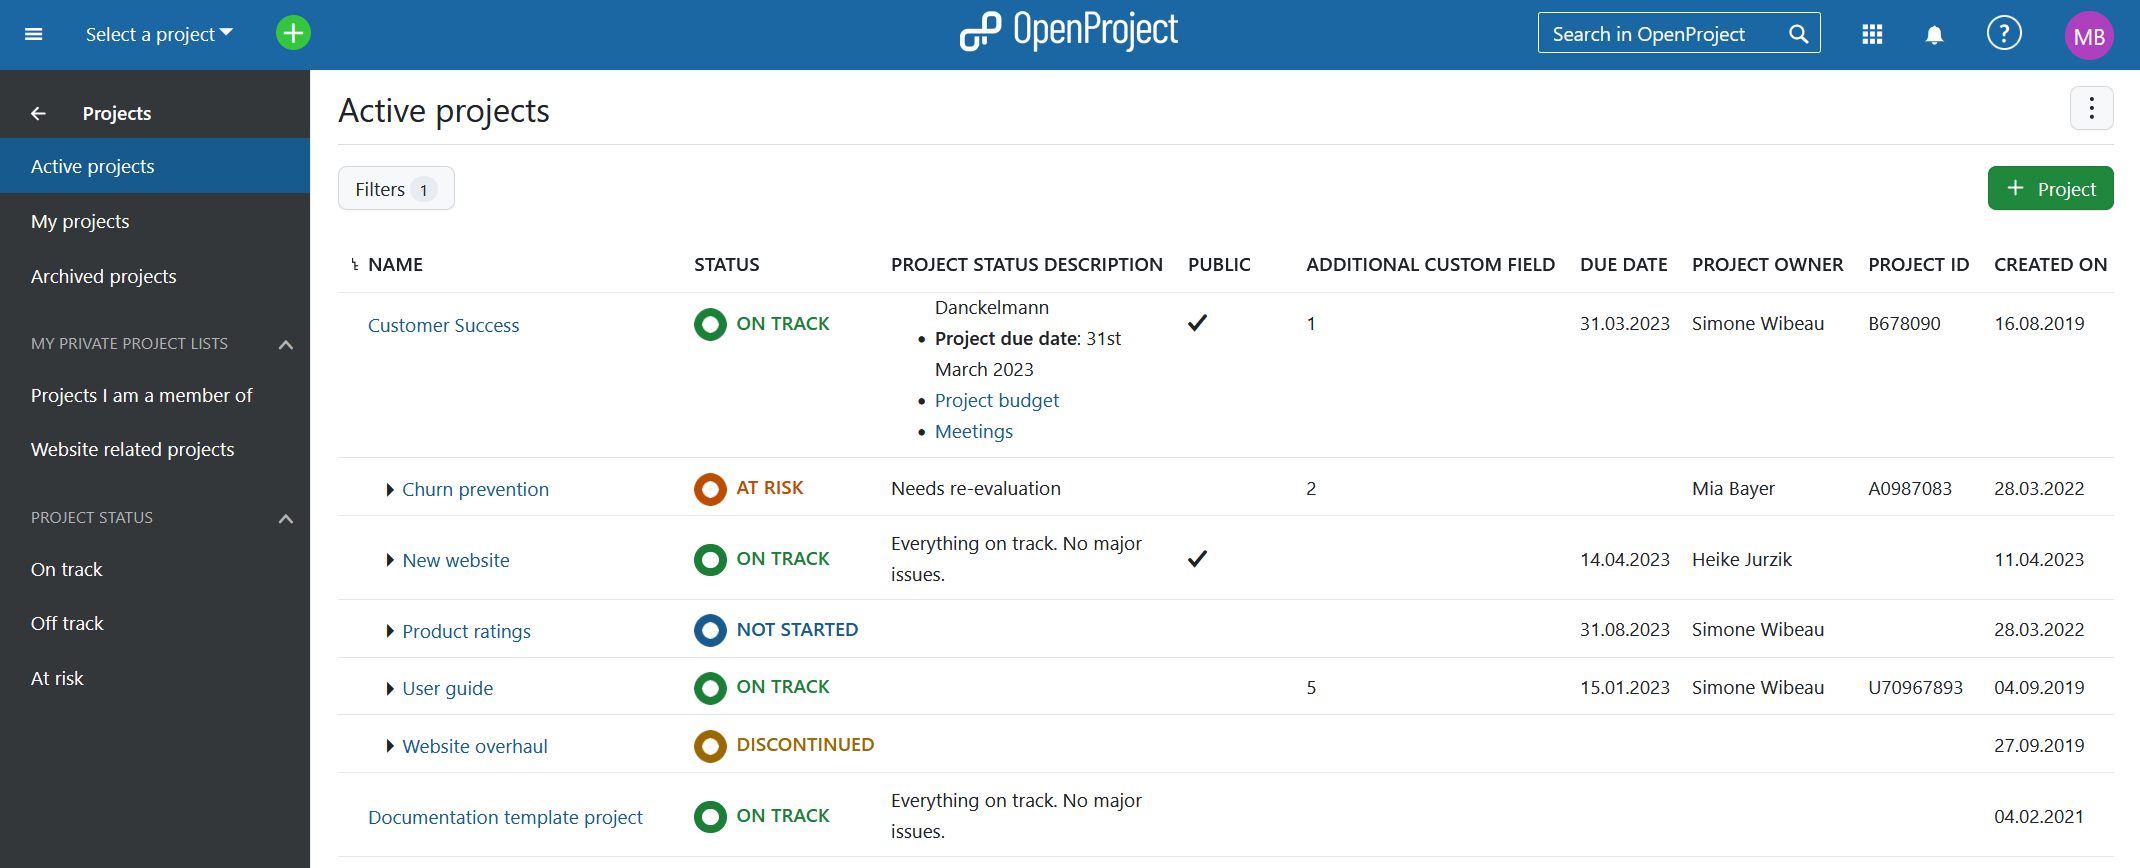 OpenProject projects overview in the global modules menu